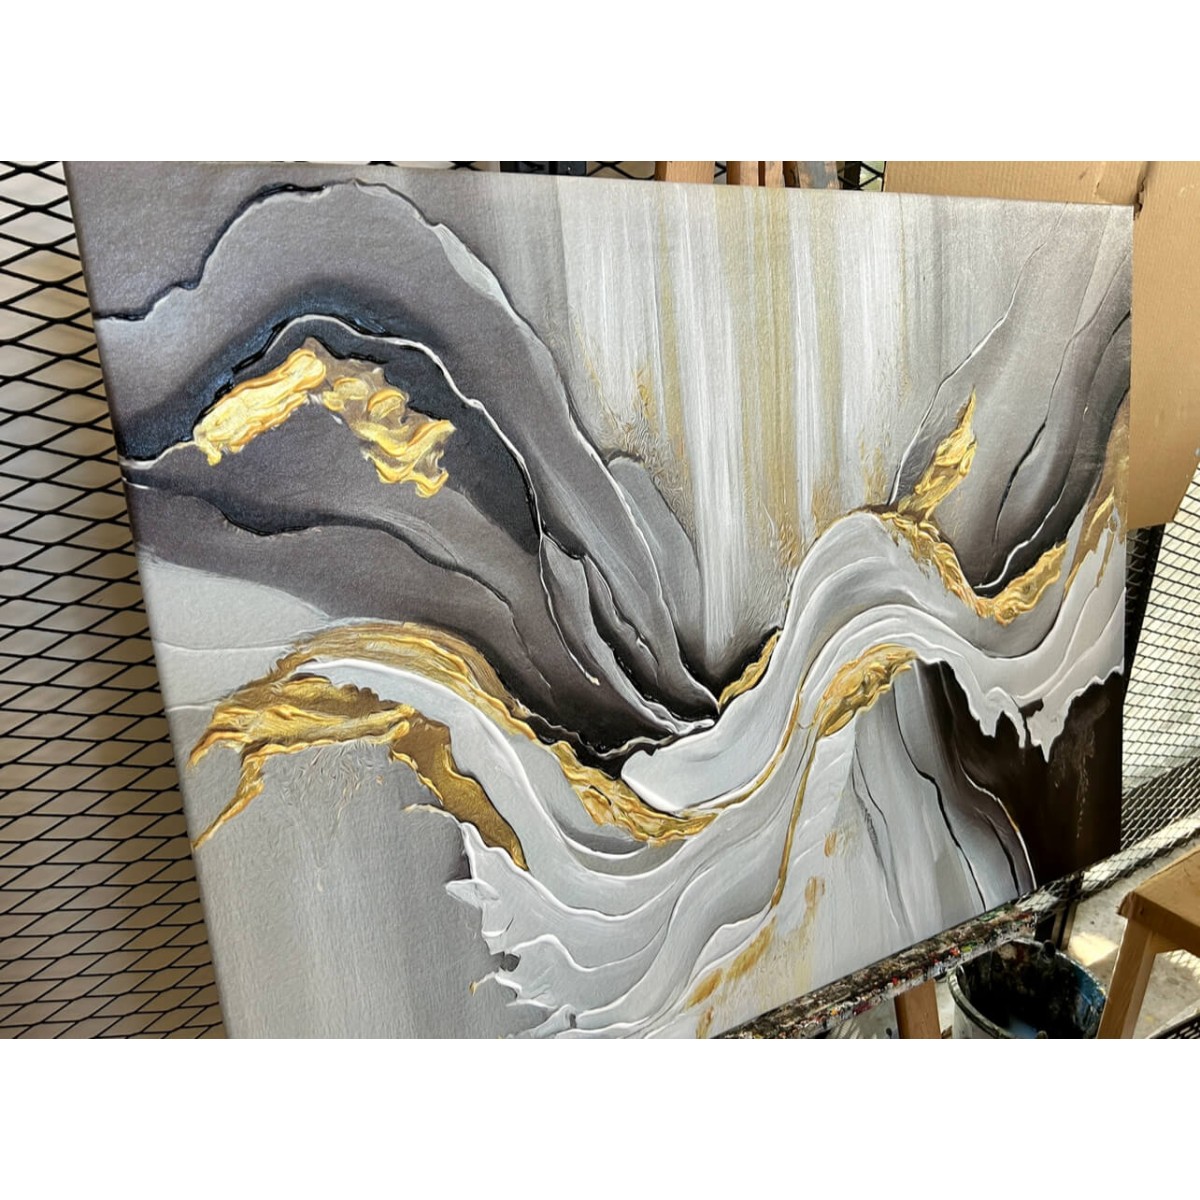 Harmony of Gold n Grey 3d Heavy Textured Partial Oil Painting